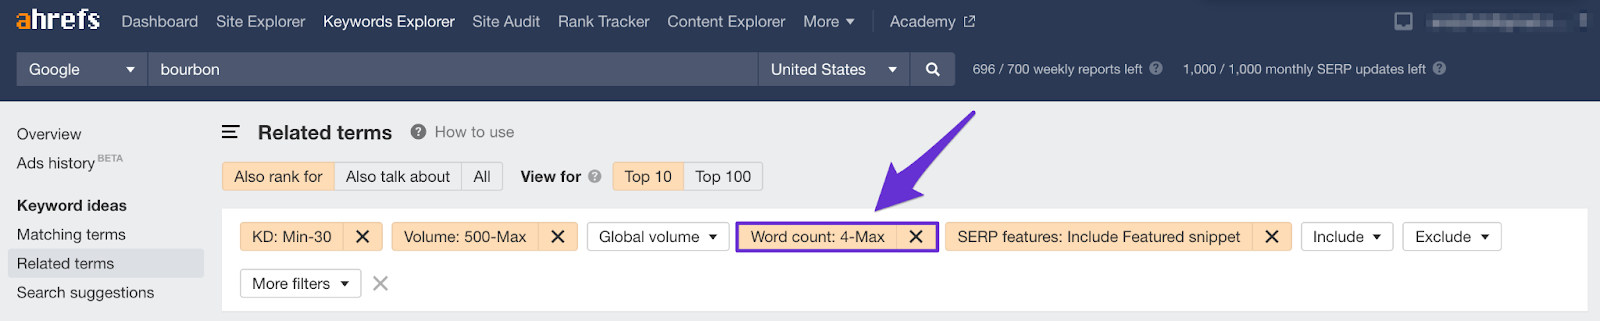 ahrefs word count filter for finding long tail keywords